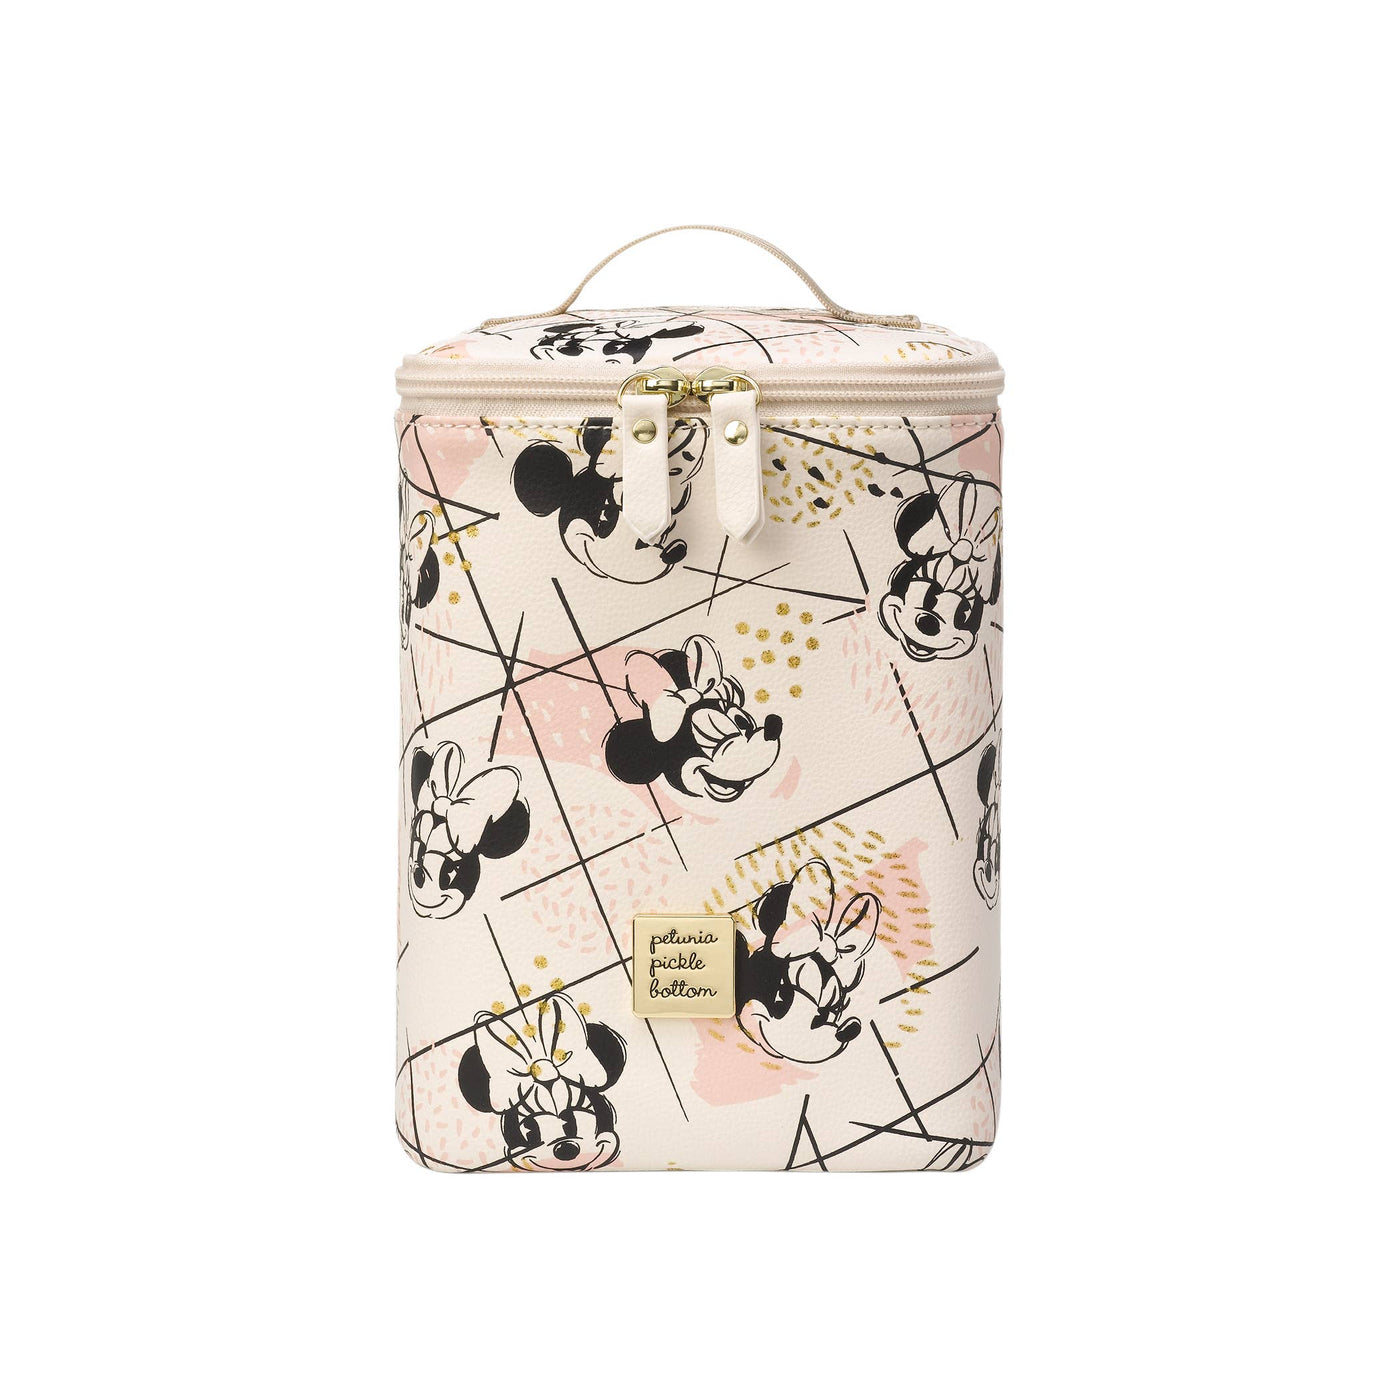 SHIMMERY MINNIE MOUSE COOLER BAG - FINAL SALE